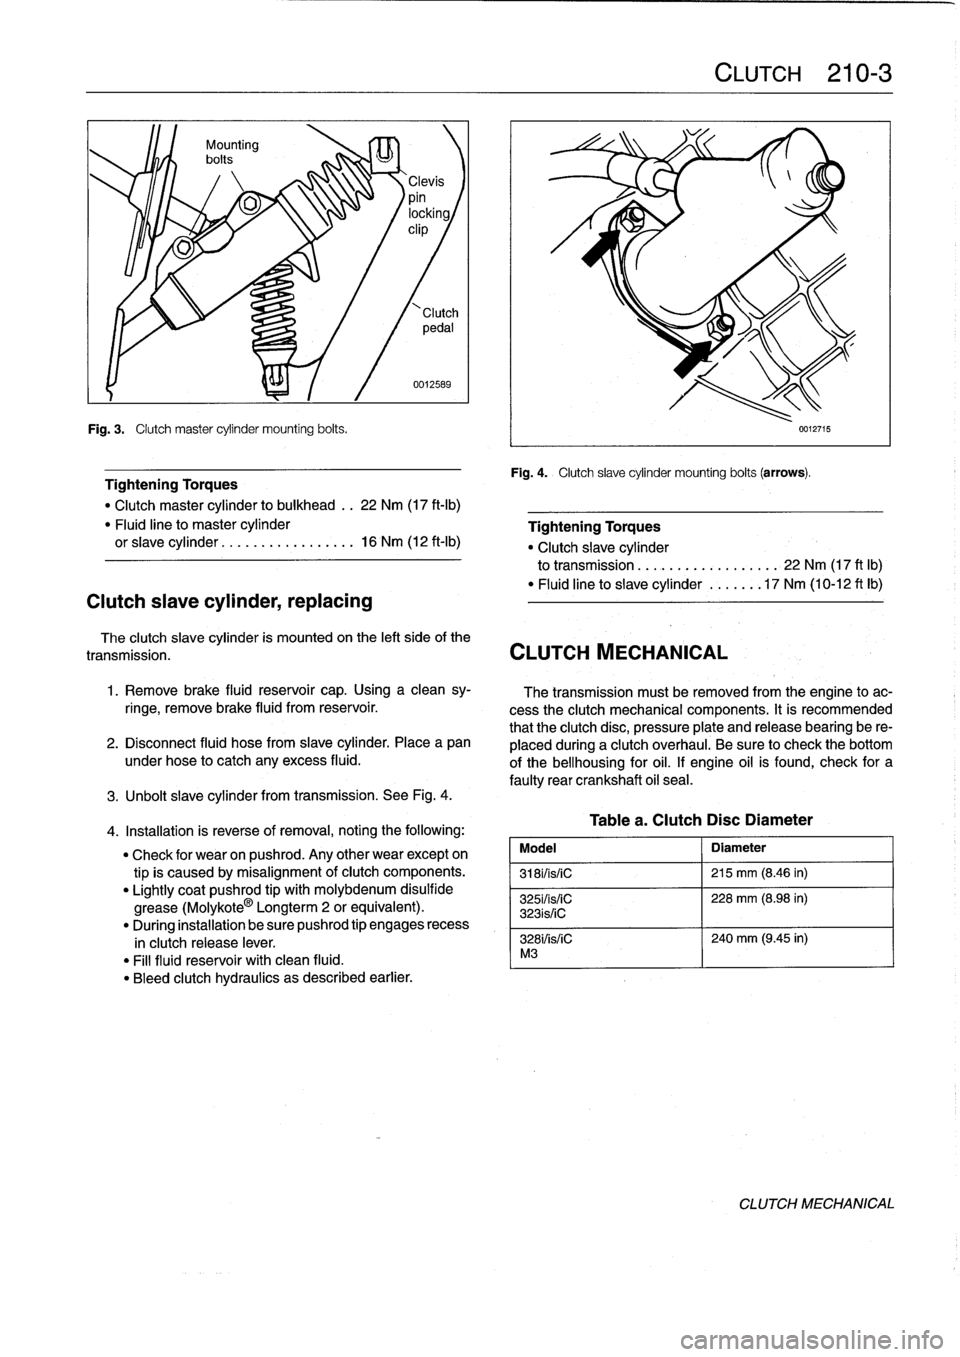 BMW M3 1996 E36 User Guide Fig
.
3
.

	

Clutch
master
cylinder
mounting
bolts
.

Clutch
slave
cylinder,
replacing

0012589

Tightening
Torques

"
Clutch
master
cylinder
to
bulkhead
..
22
Nm
(17
ft-Ib)
"
Fluid
line
to
master
cy